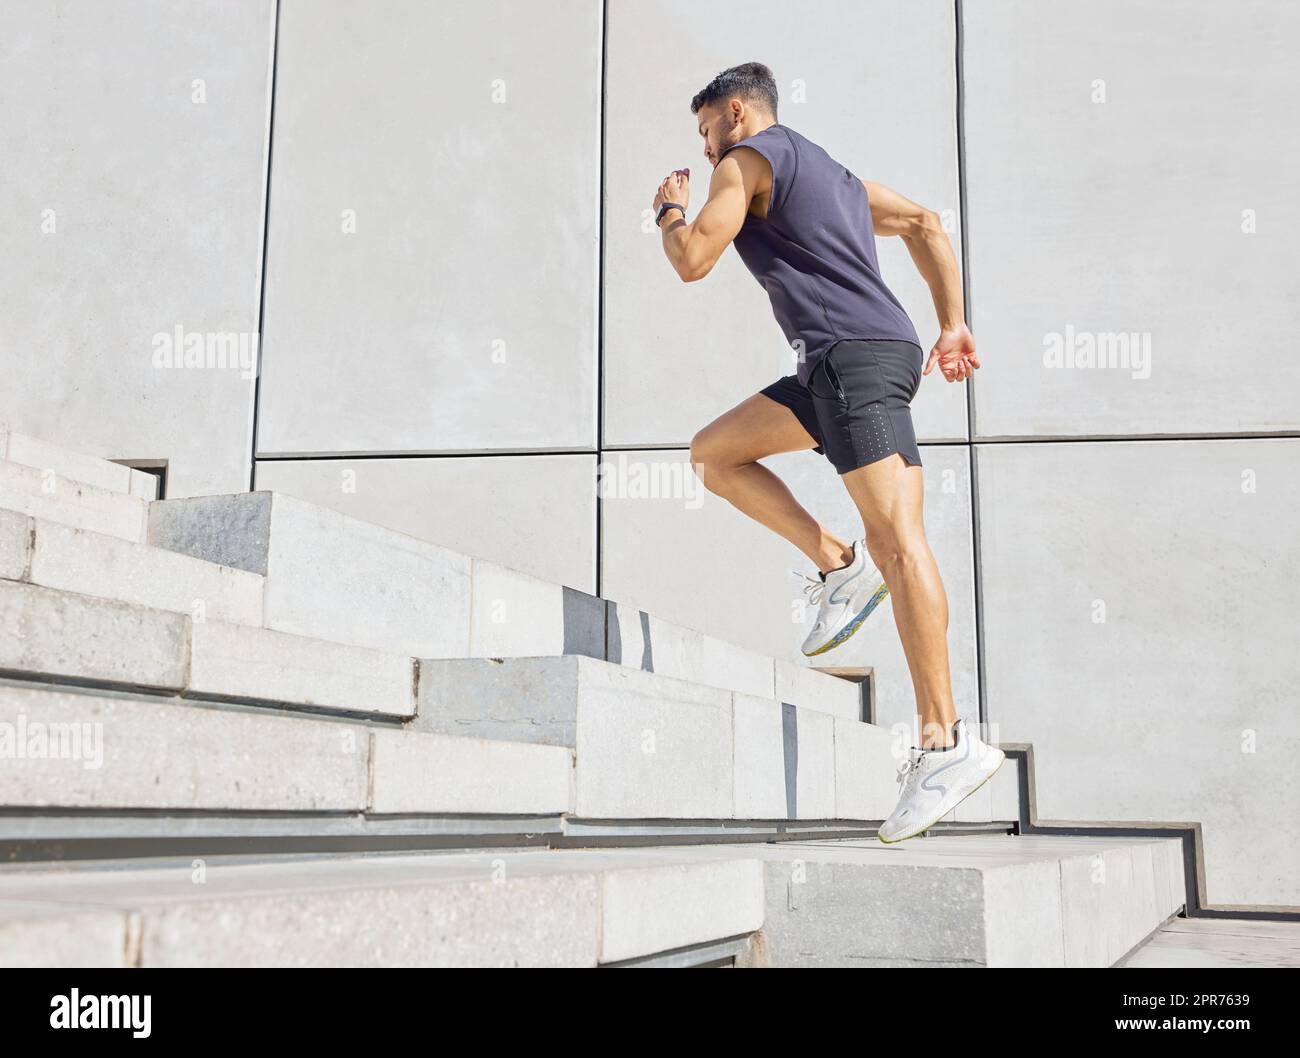 Head up and aim high. Low angle shot of a sporty young man running up a staircase while exercising outdoors. Stock Photo